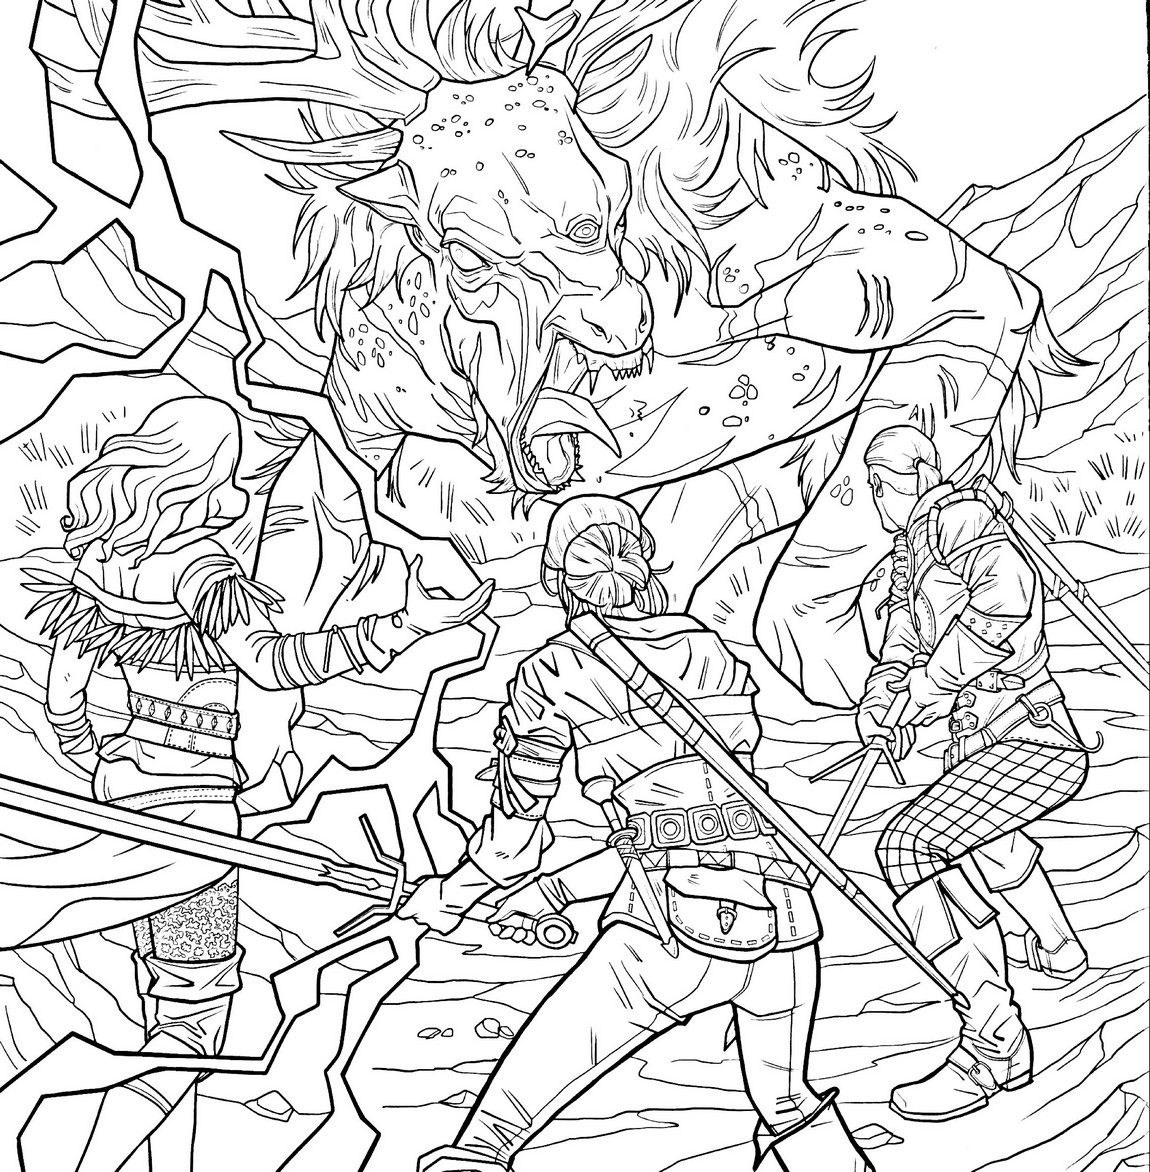 Coloring page Witcher Battle with the most dangerous monster